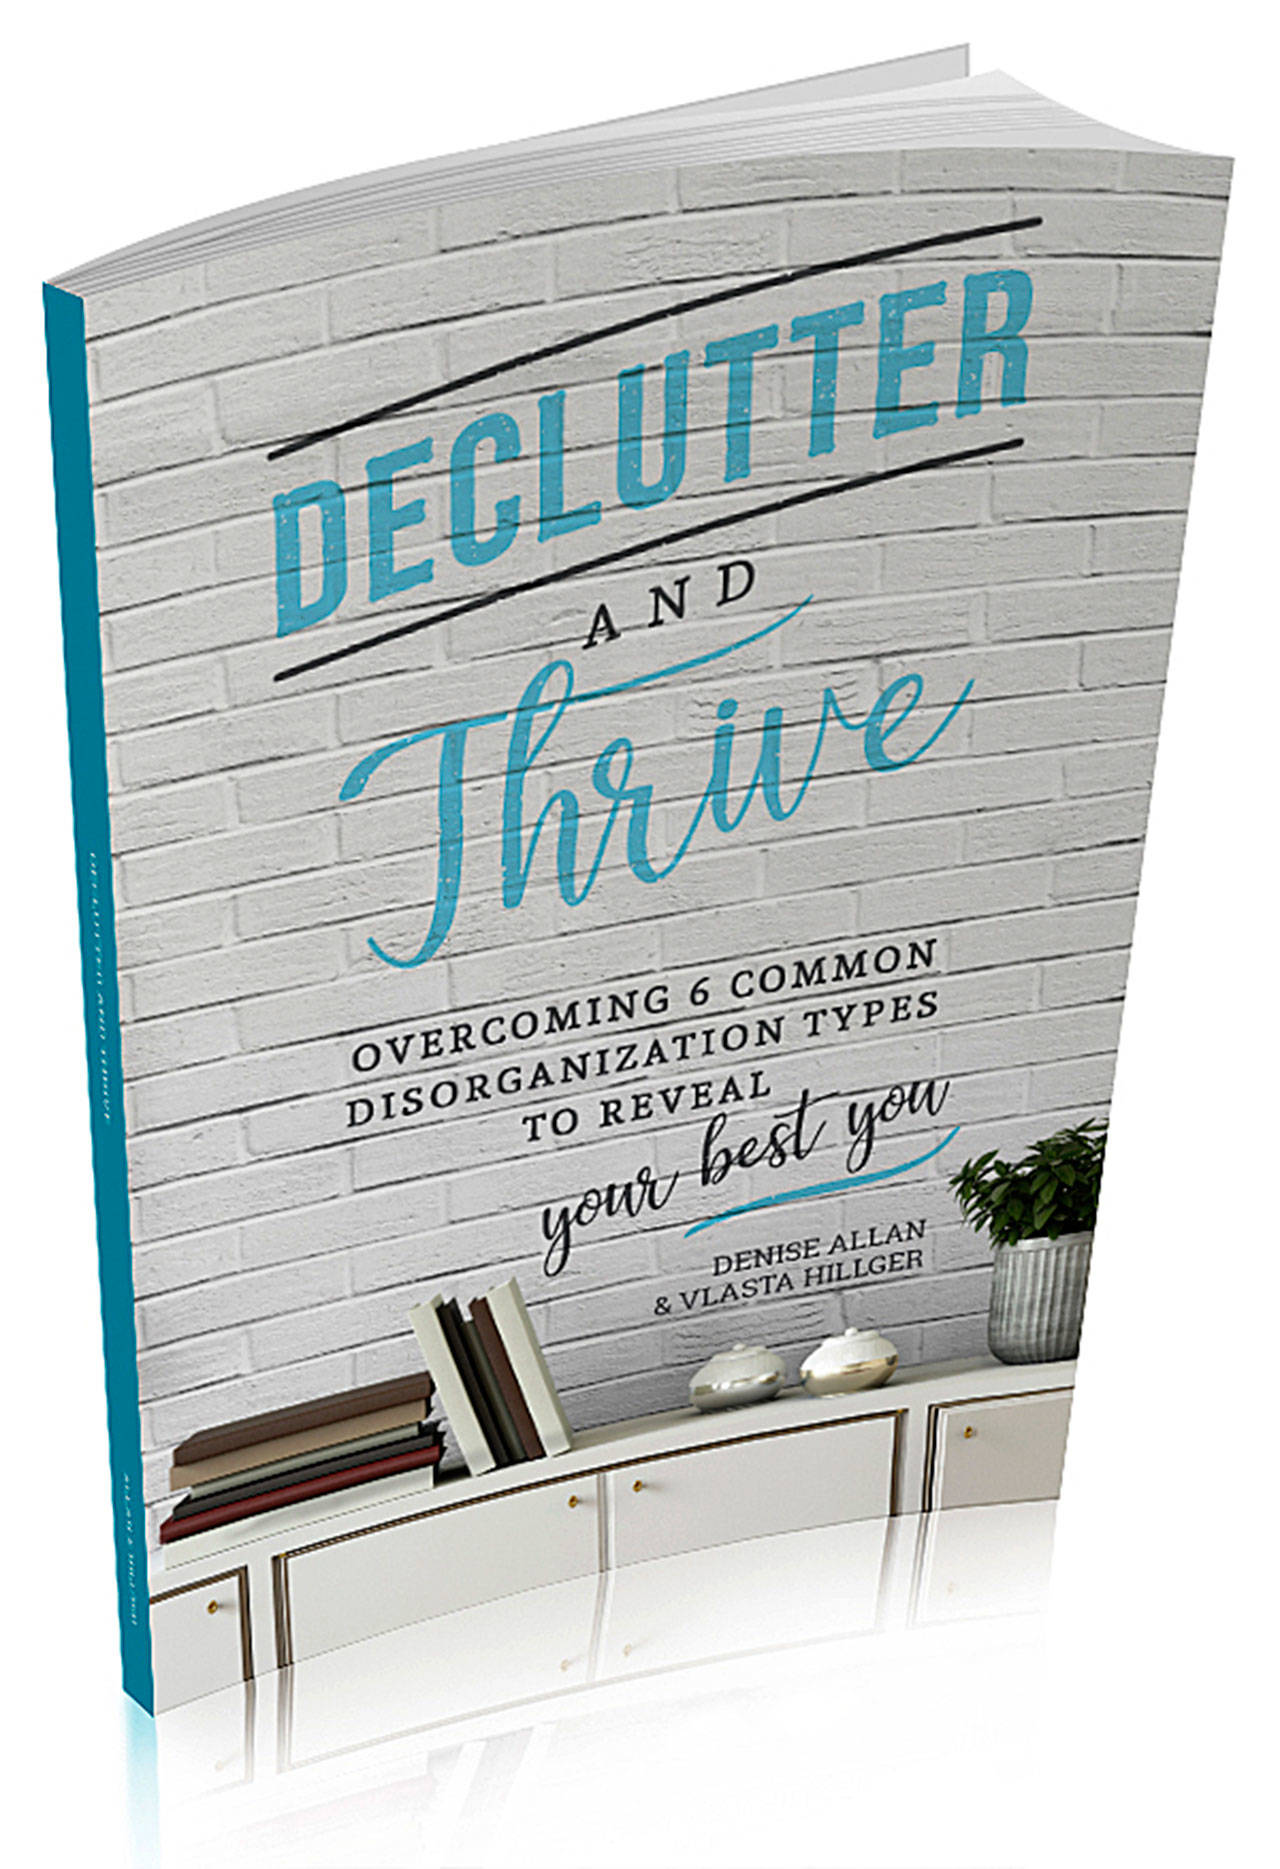 Professional organizers write guide to ‘declutter and thrive’